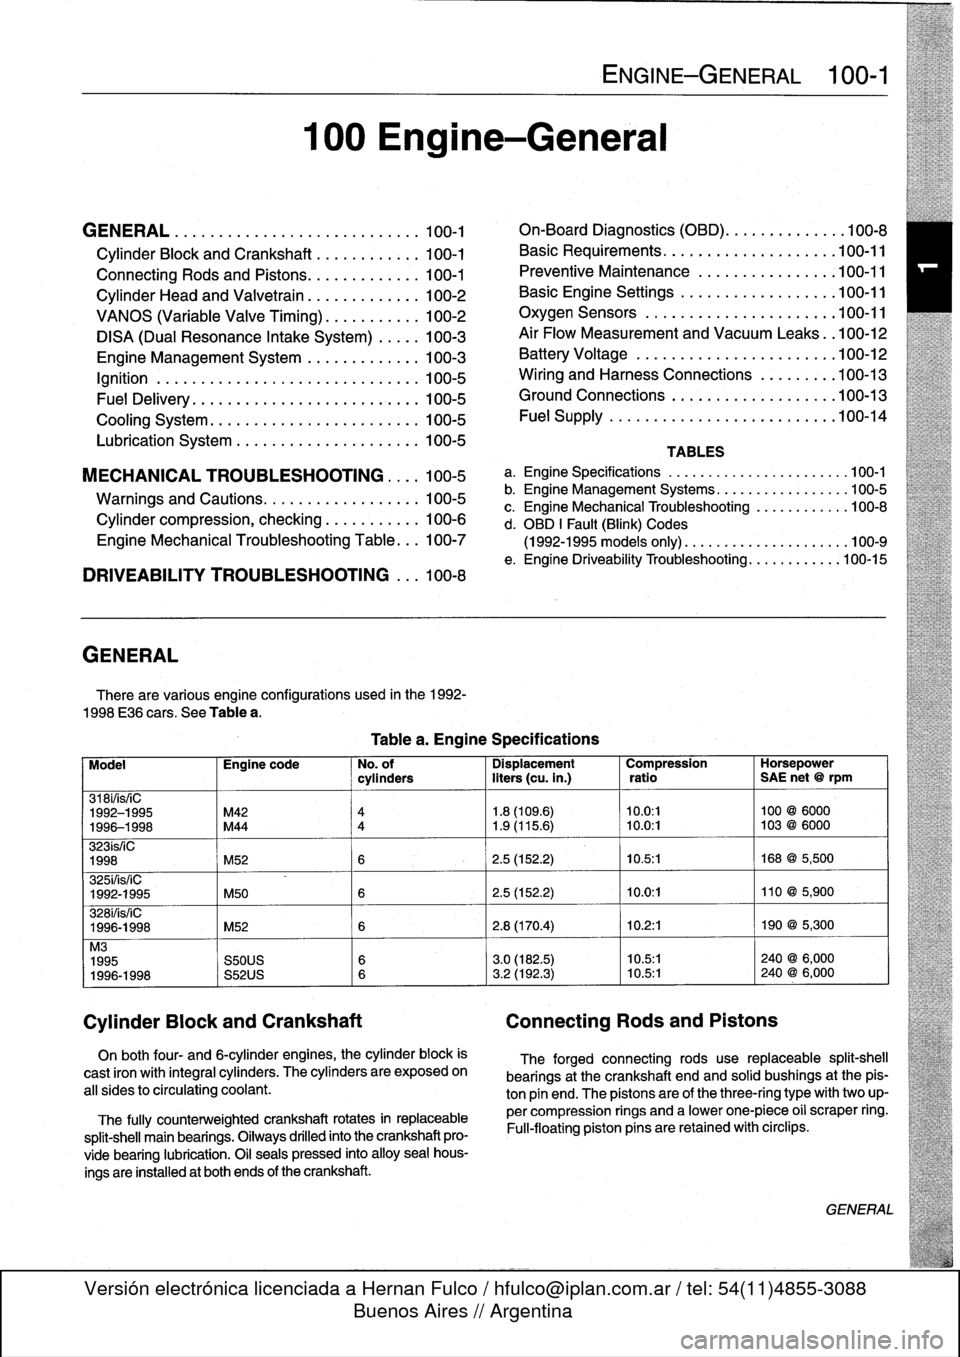 BMW 328i 1993 E36 Workshop Manual 
GENERAL
.
.....
.
.
.
.
.
.
.
...
.
.
.
.
.
.
.
.
.
...
100-1

Cylinder
Block
and
Crankshaft
.
.
.
.
.
.
.
.
.
...
100-1

Connecting
Rods
and
Pistons
.
.
.
.
.
.
.
.
.
.
.
.
.
100-1

Cylinder
Head
an